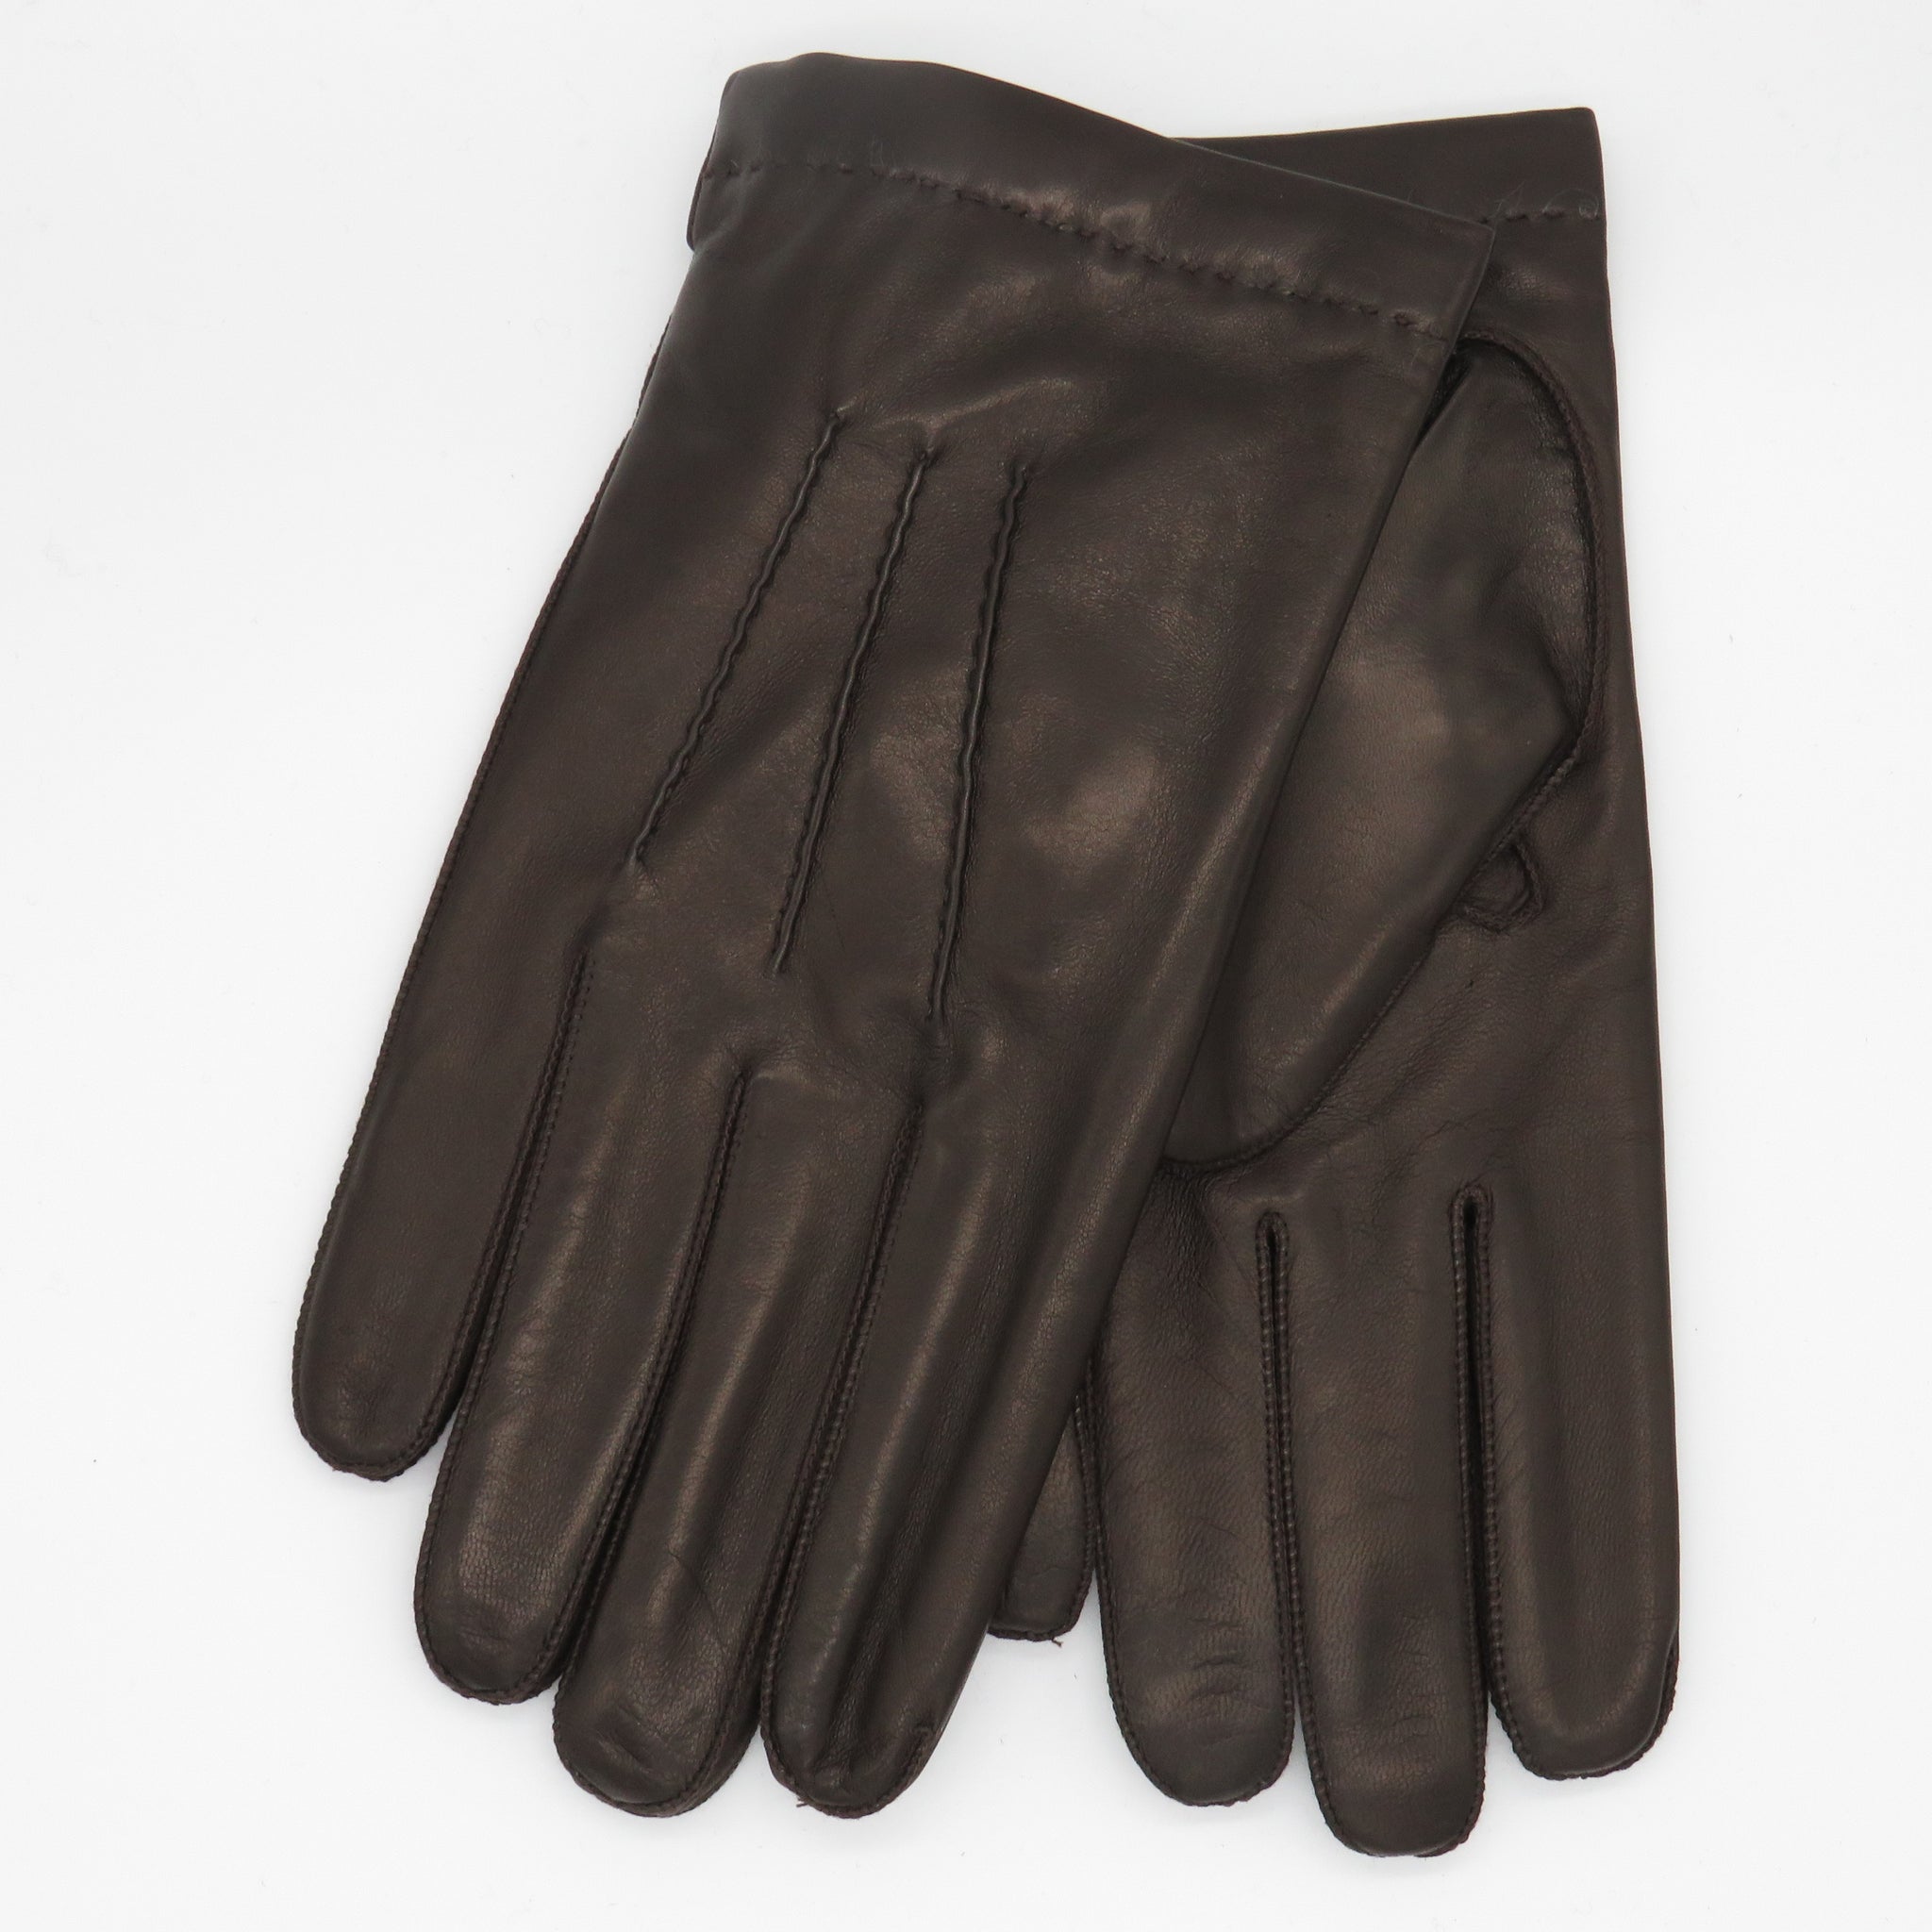 Men's leather glove cashmere lining  BROWN